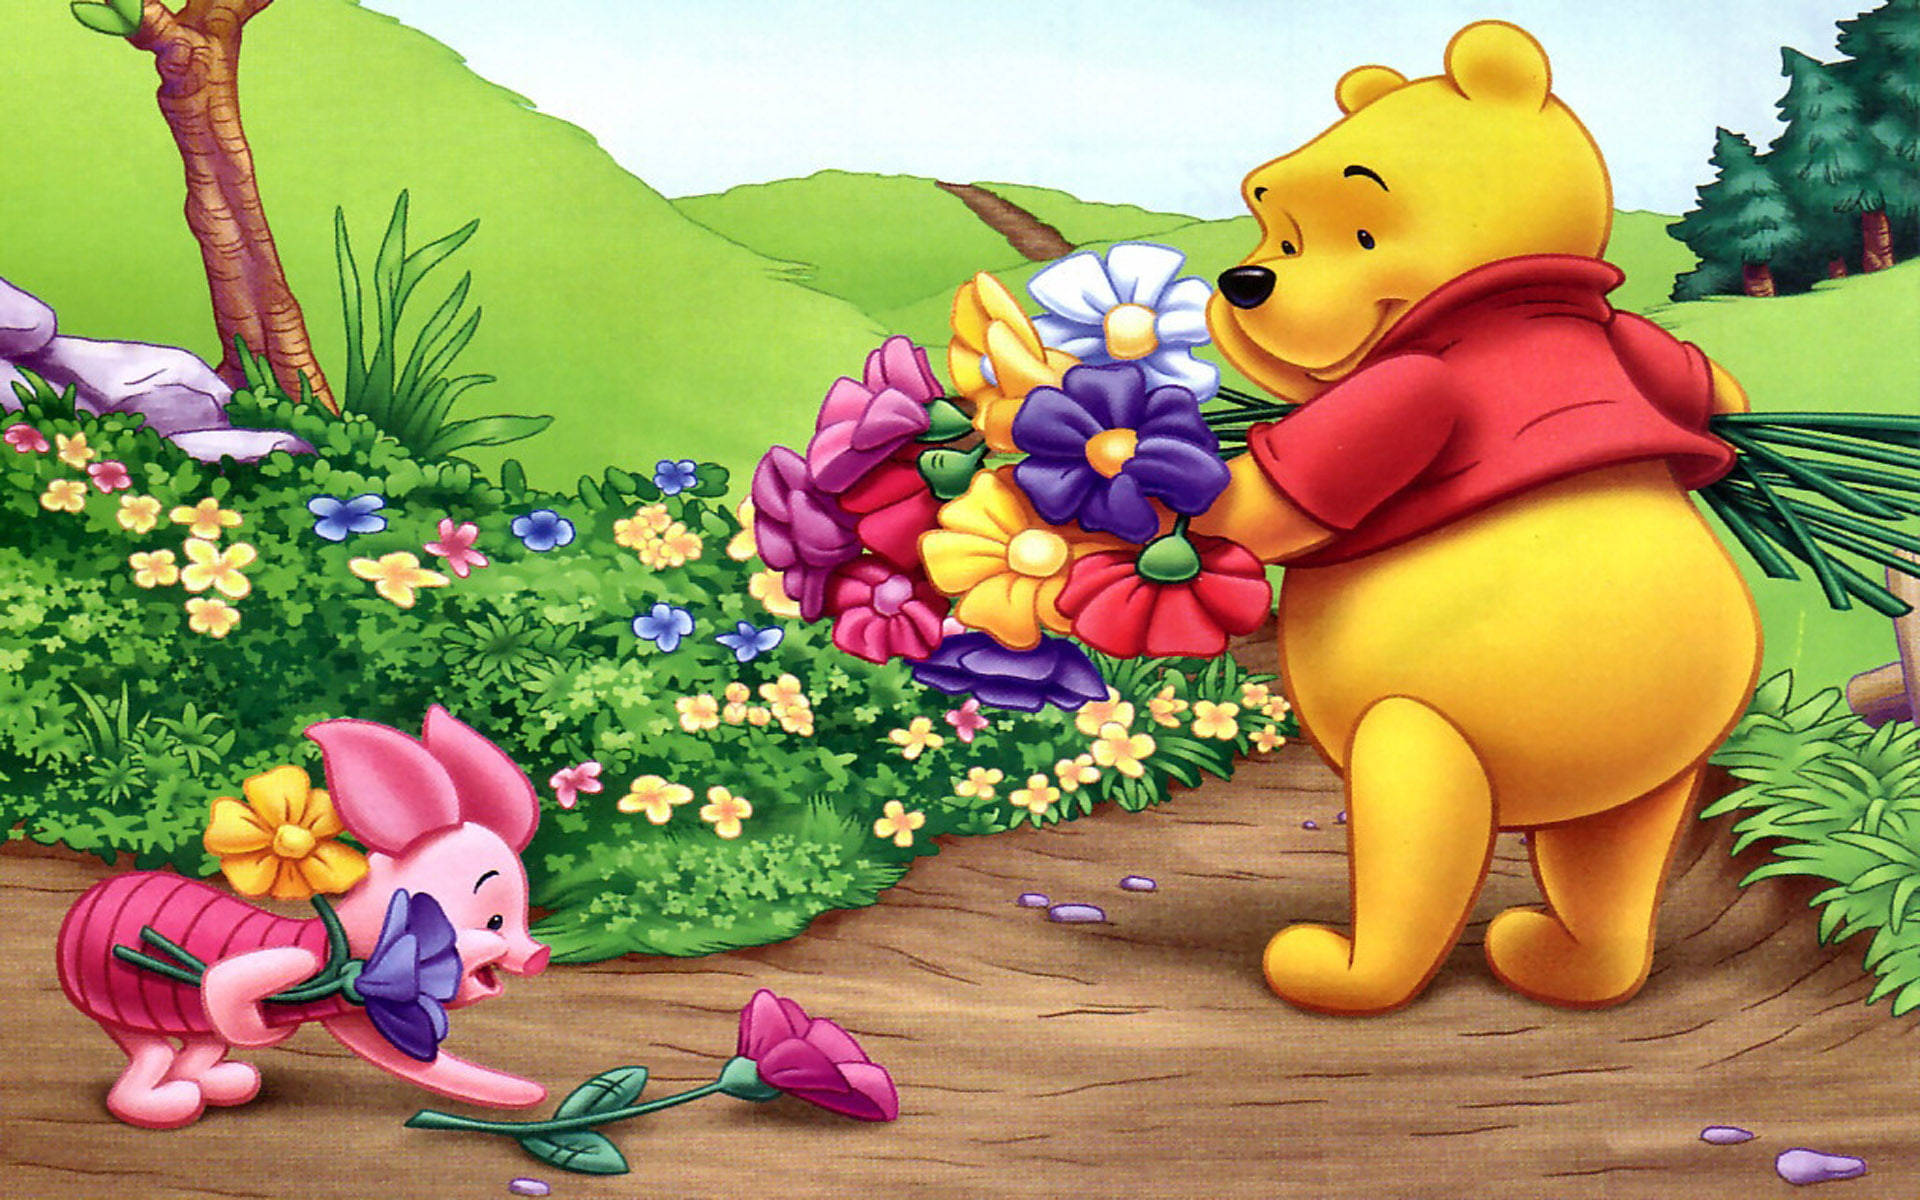 Cute Winnie The Pooh With Flowers